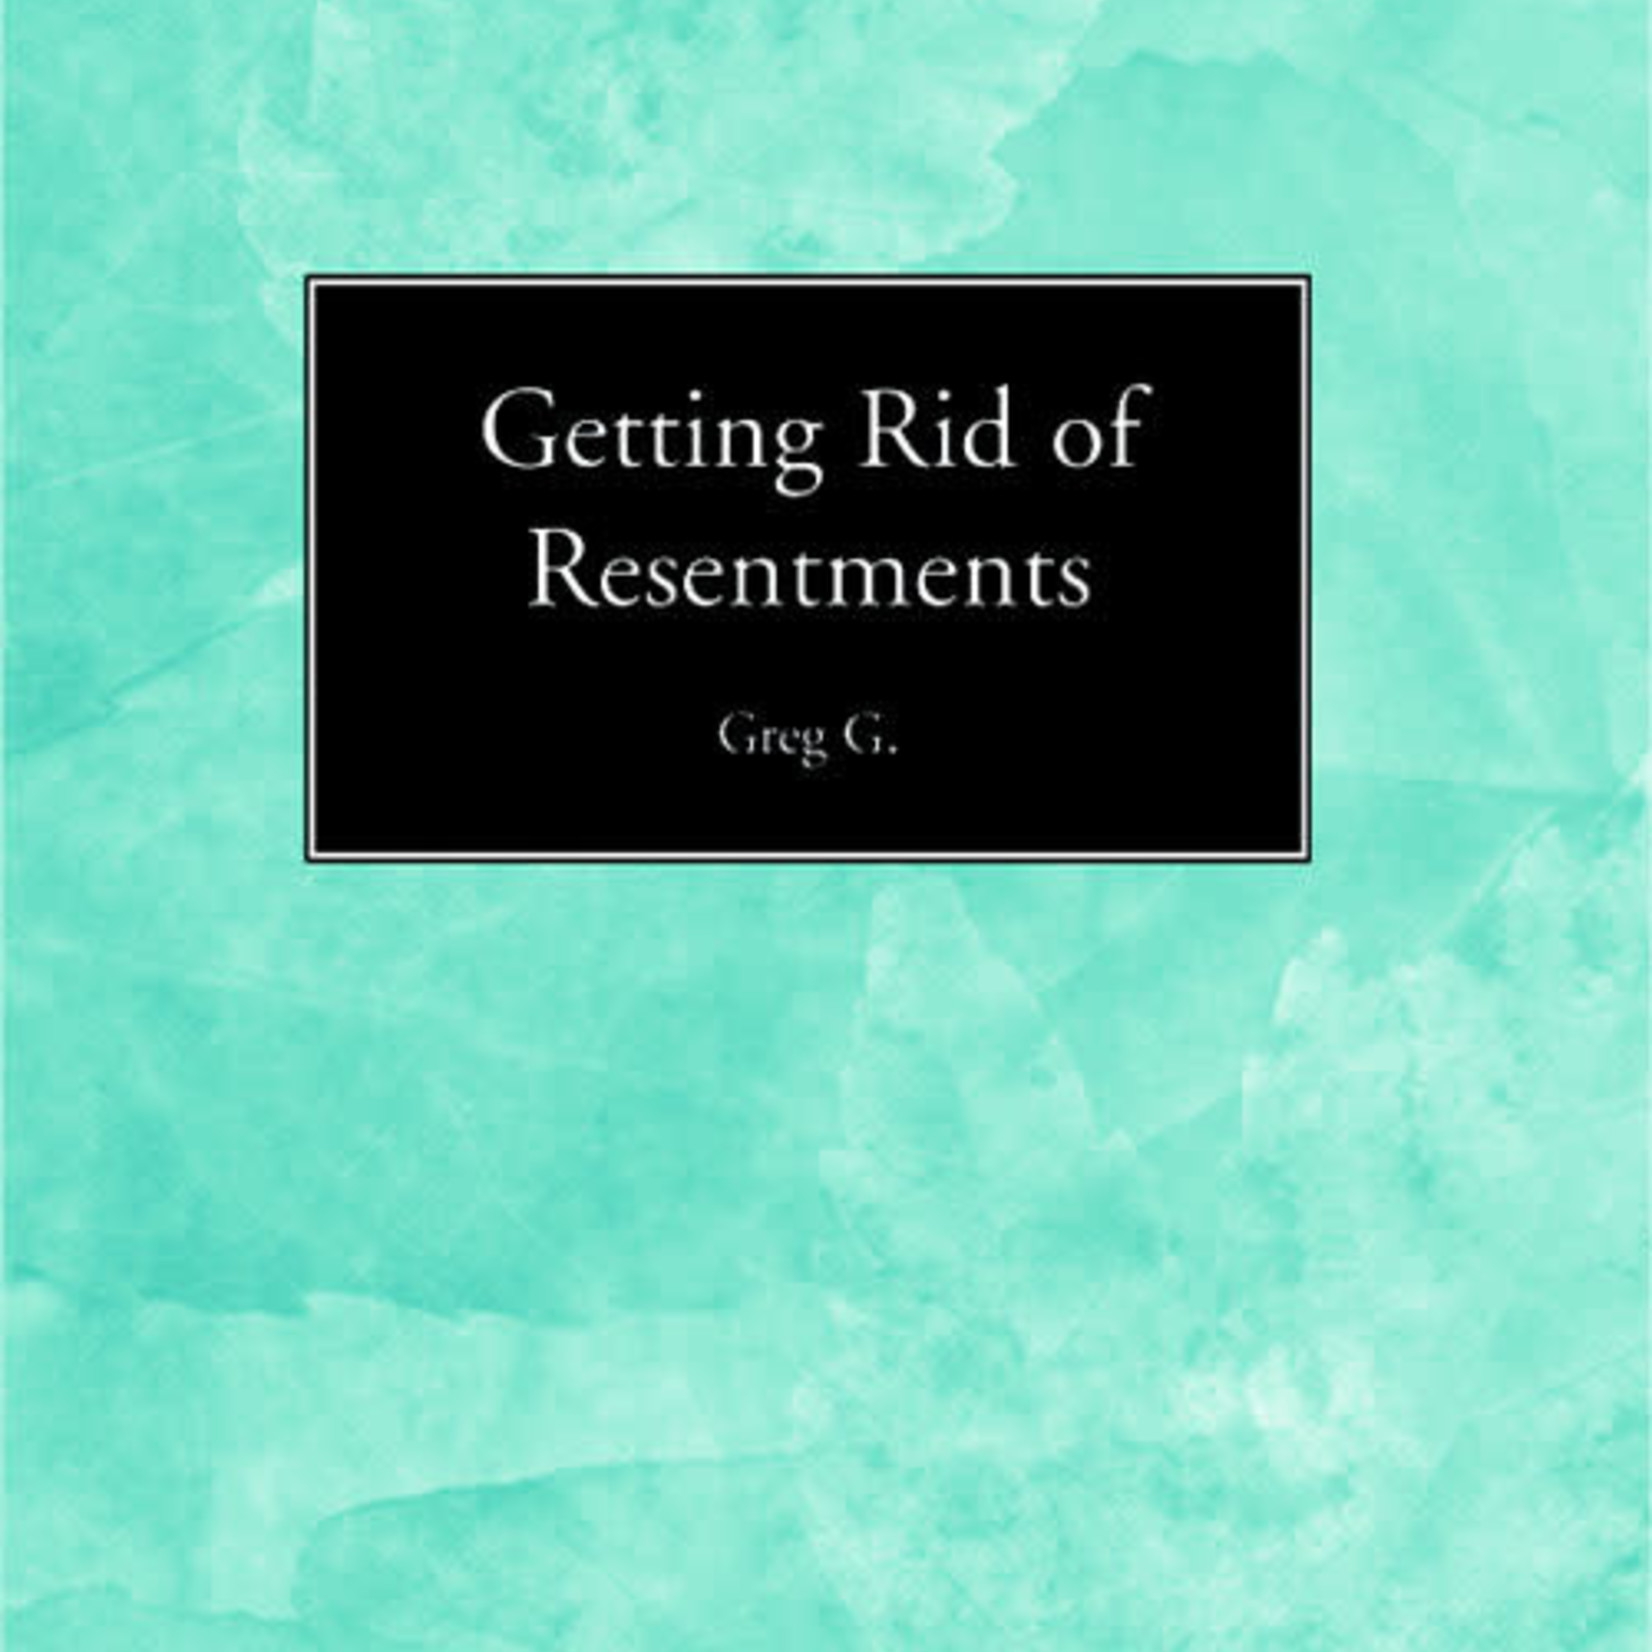 Getting Rid of Resentments